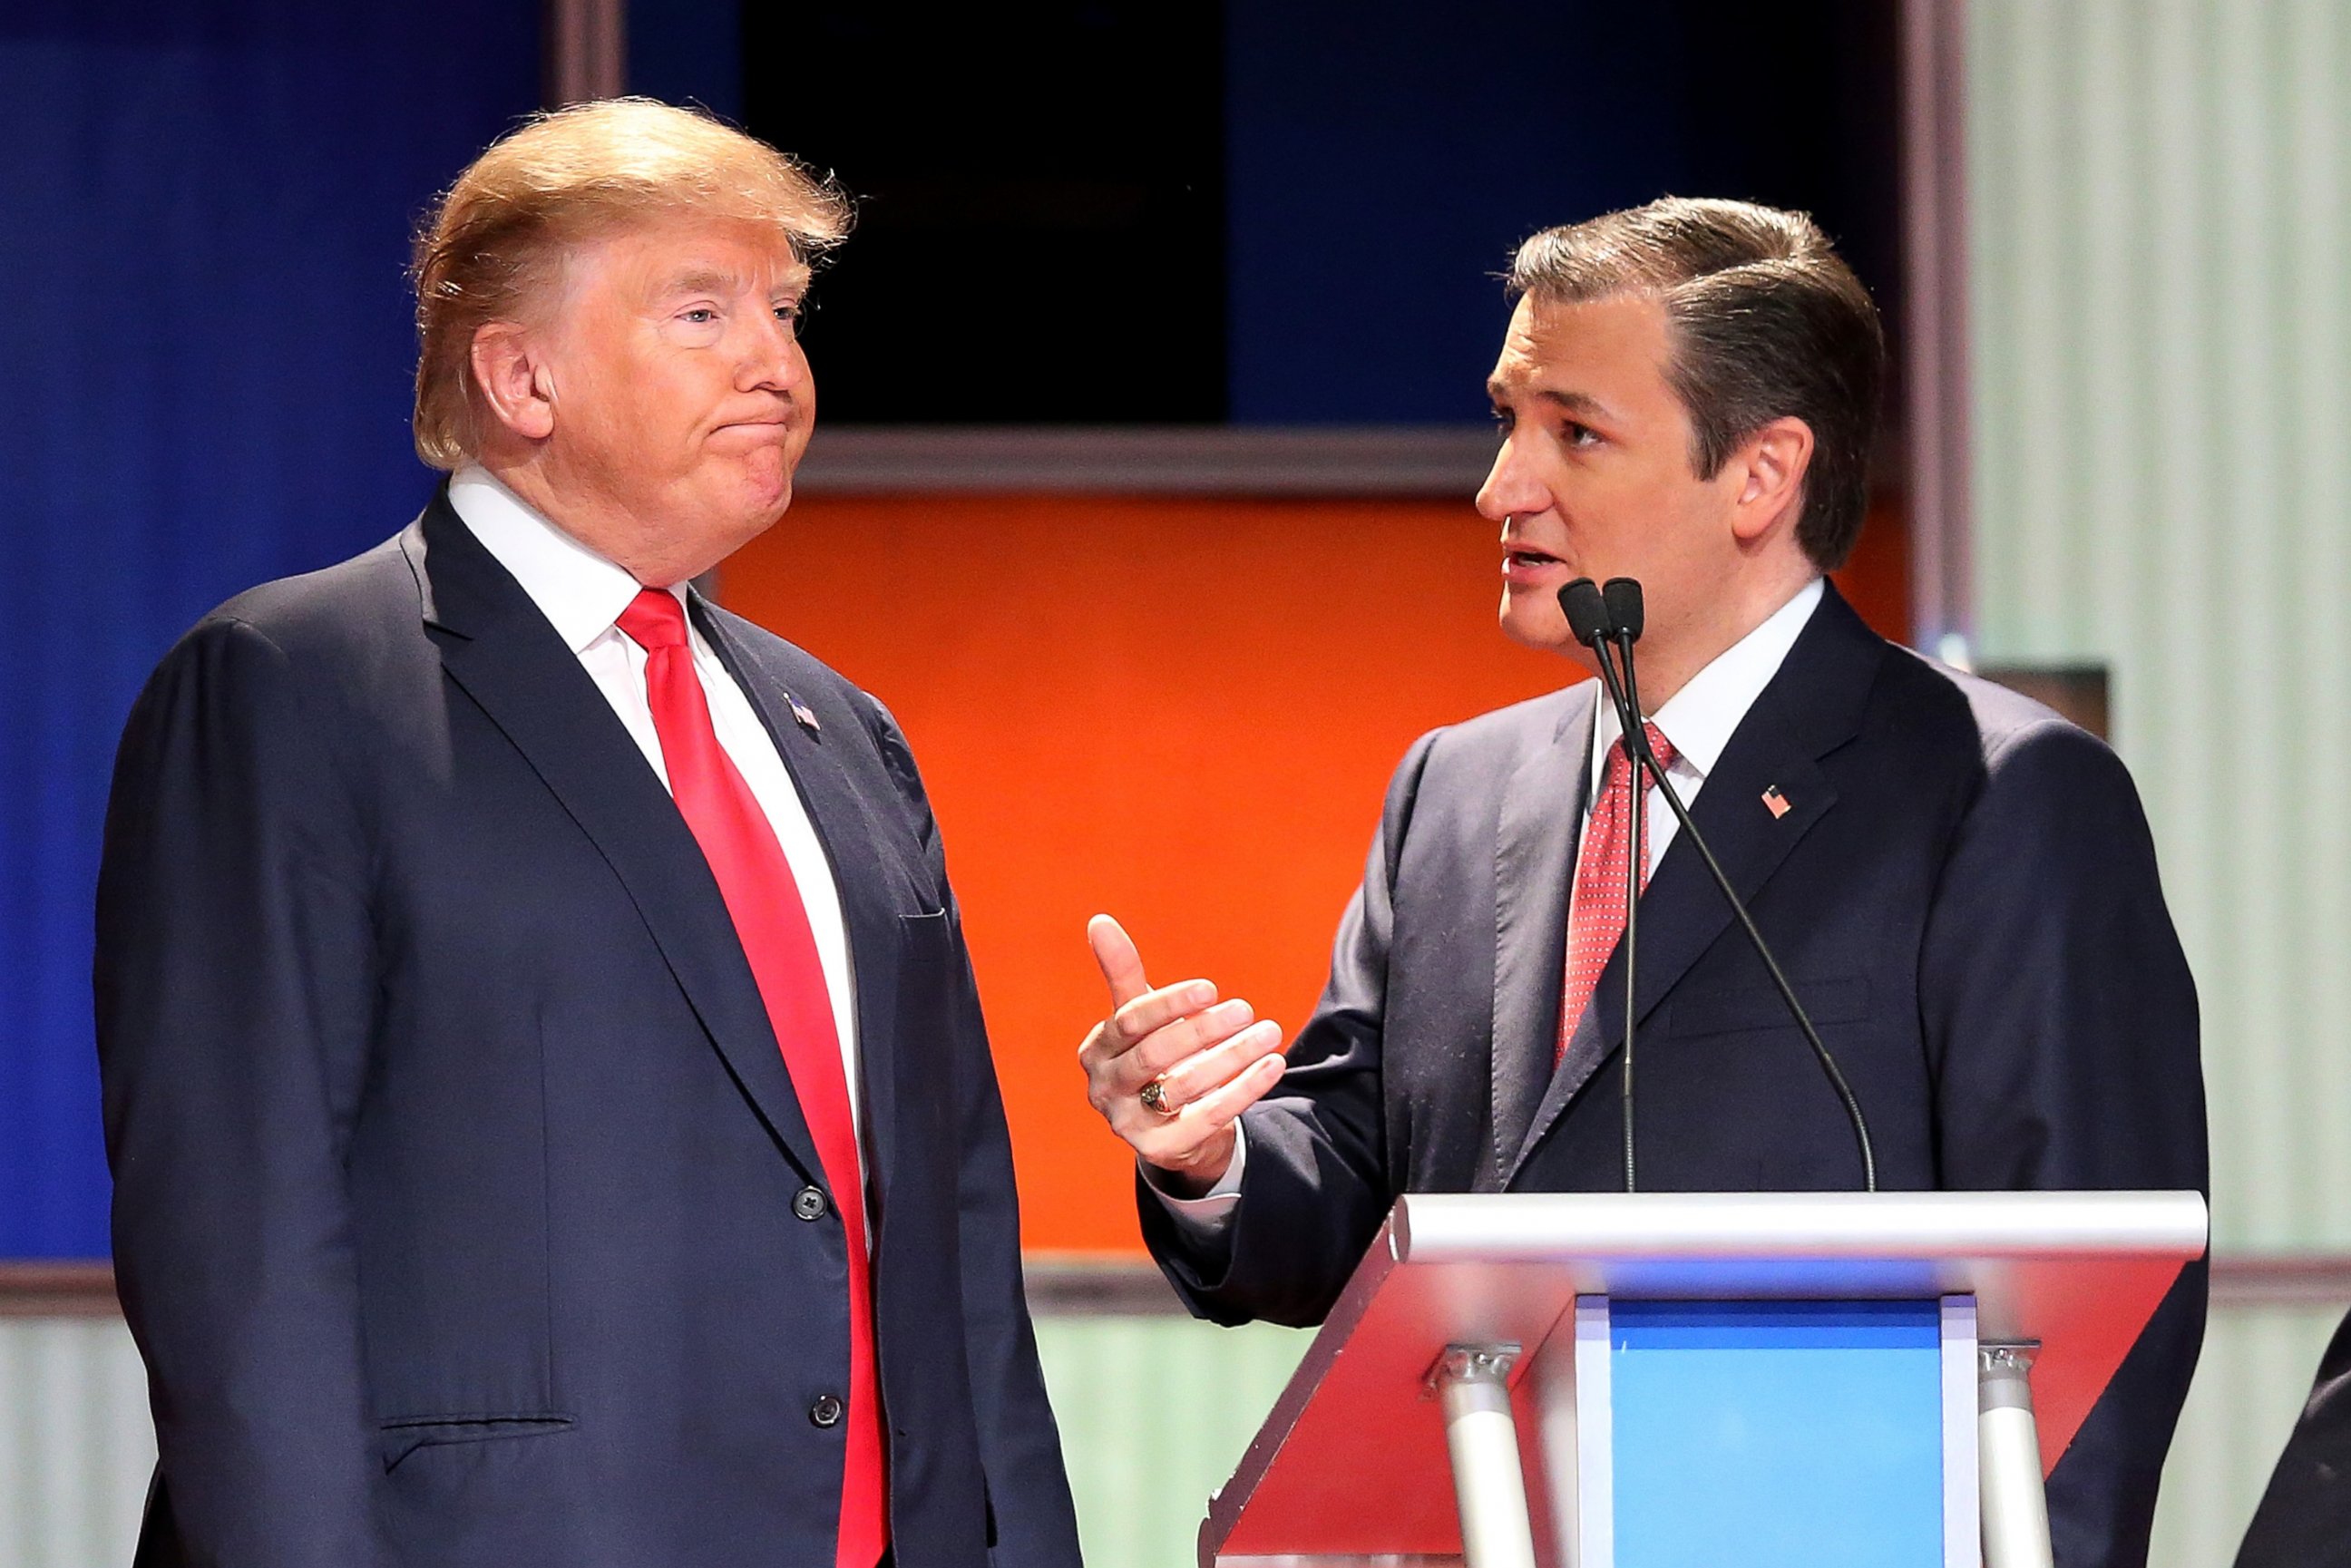 PHOTO: Donald Trump and Sen. Ted Cruz speak during the Fox Business Network Republican presidential debate at the North Charleston Coliseum and Performing Arts Center, Jan. 14, 2016, in North Charleston, South Carolina.